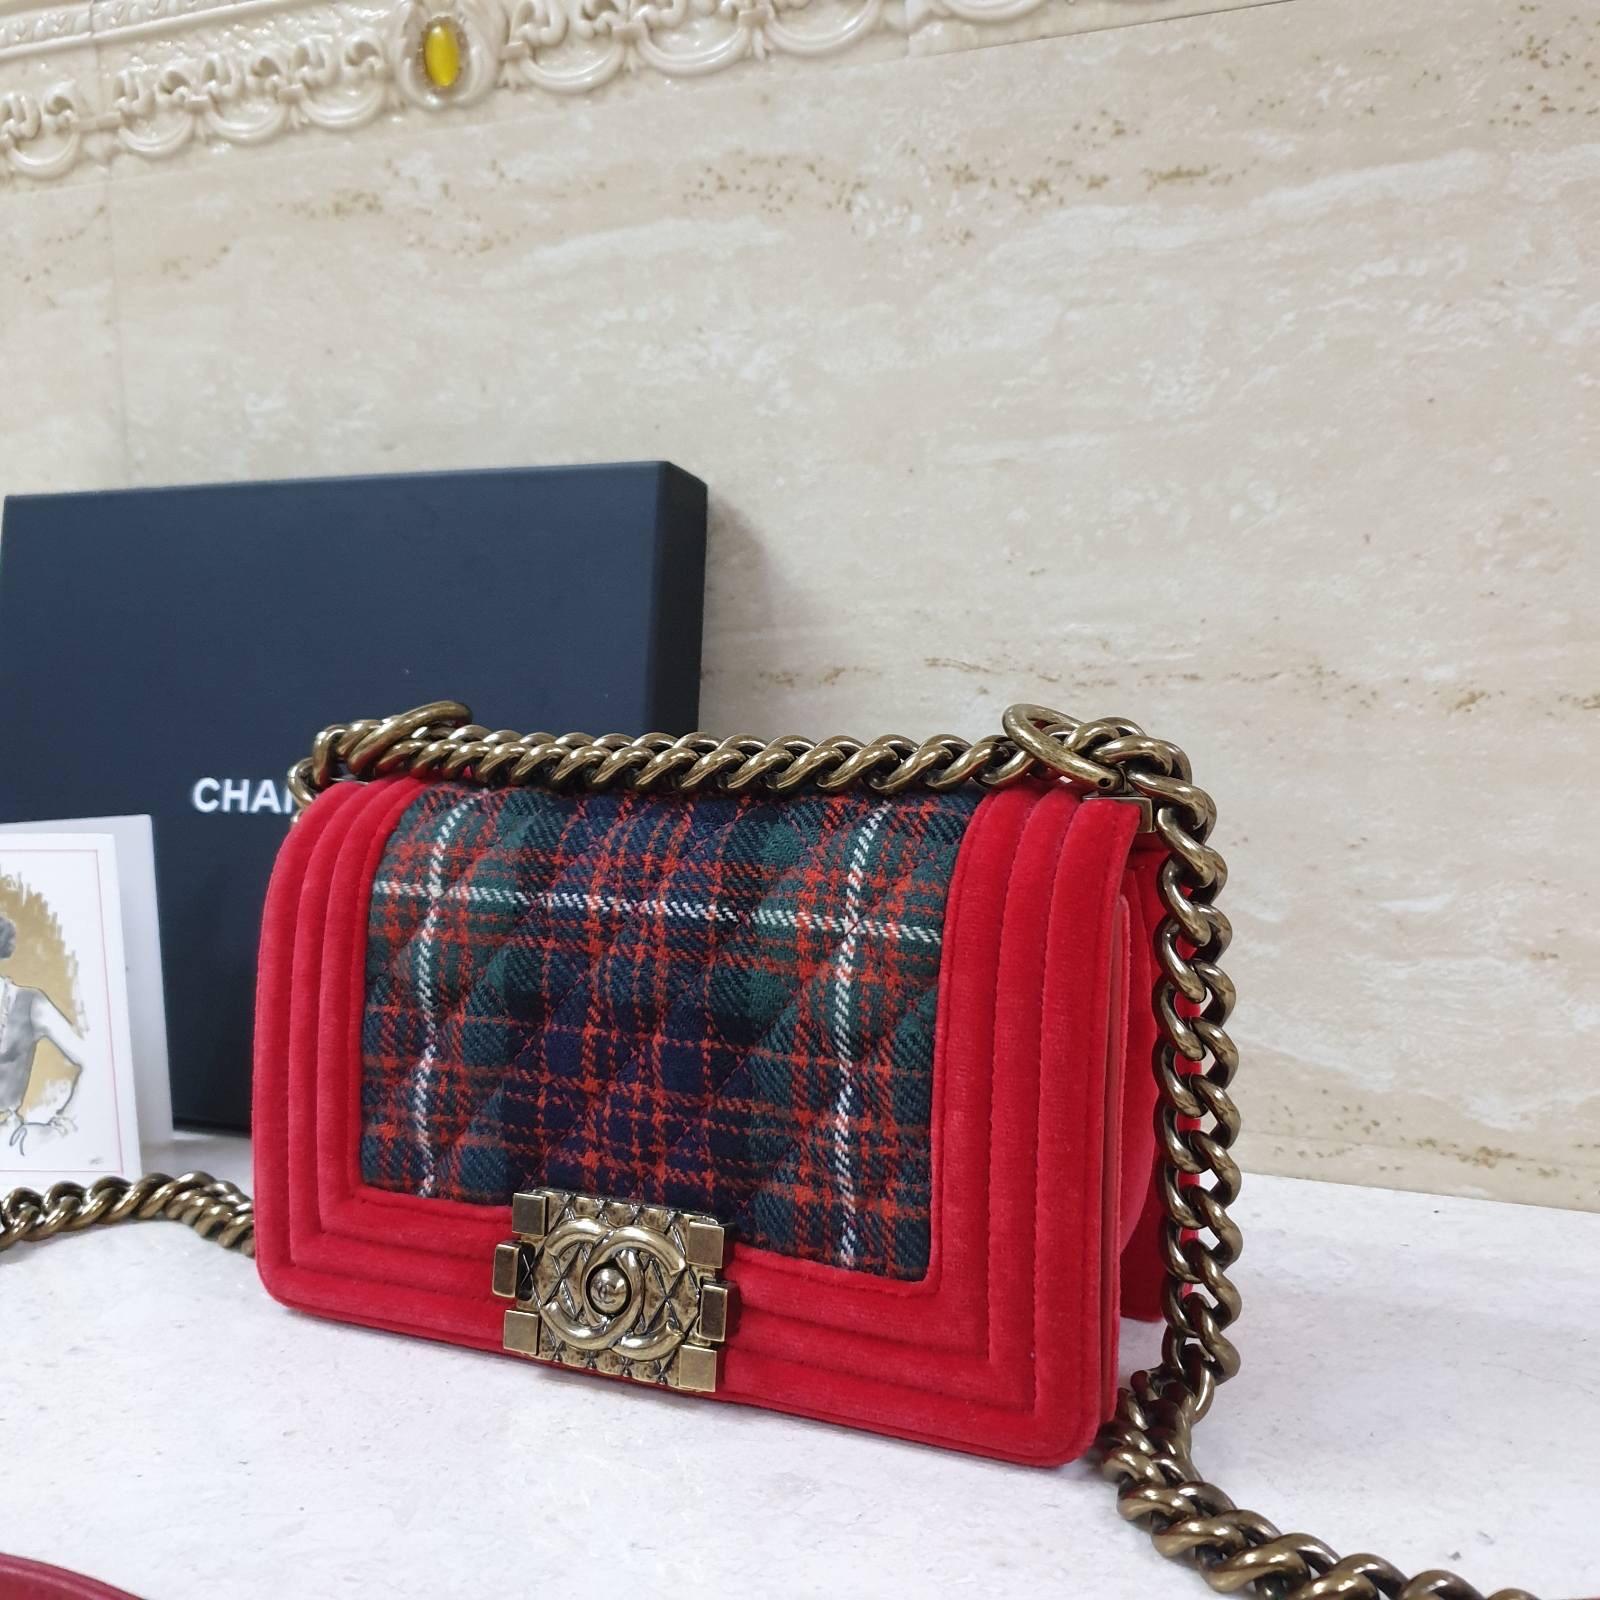 Material: 100% Leather, Tweed

 A slight change of pace from the usual Chanel designs, this bag is from the 2013 Paris-Edinburgh runway collection and is made of gorgeous red velvet and green plaid quilted tweed. The small flap has the iconic Chanel